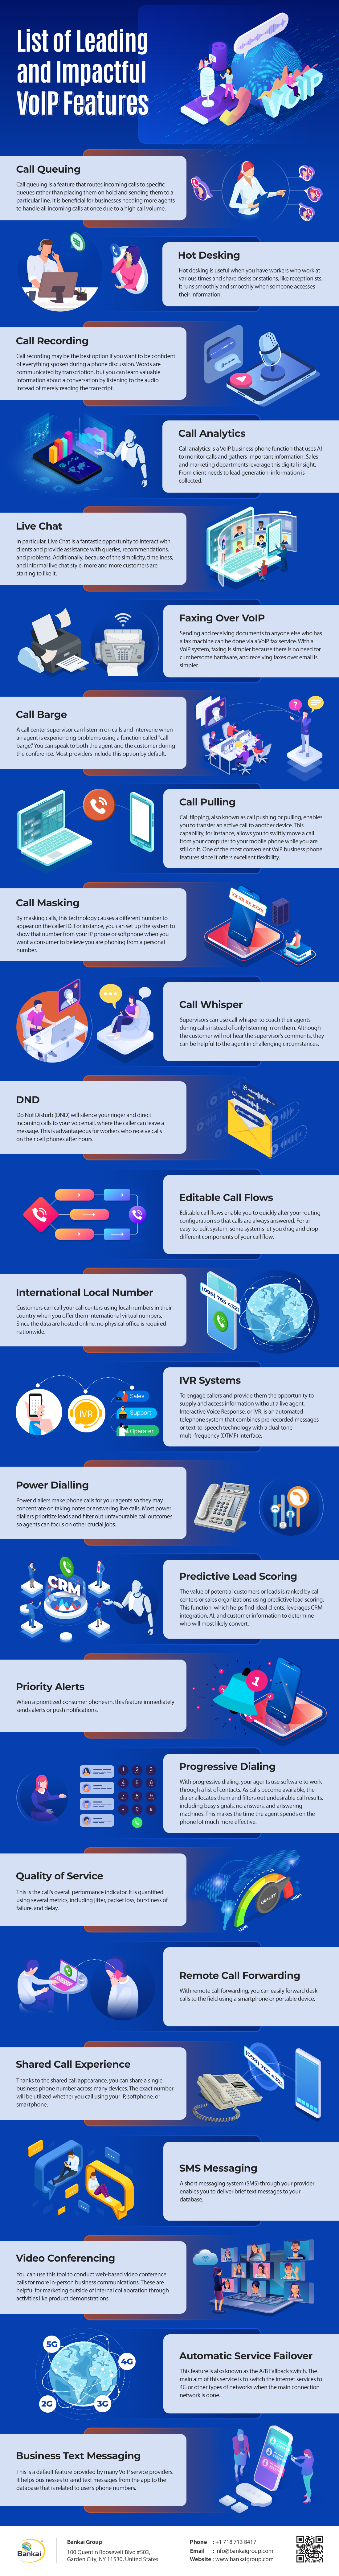 Top 25 VoIP Features 